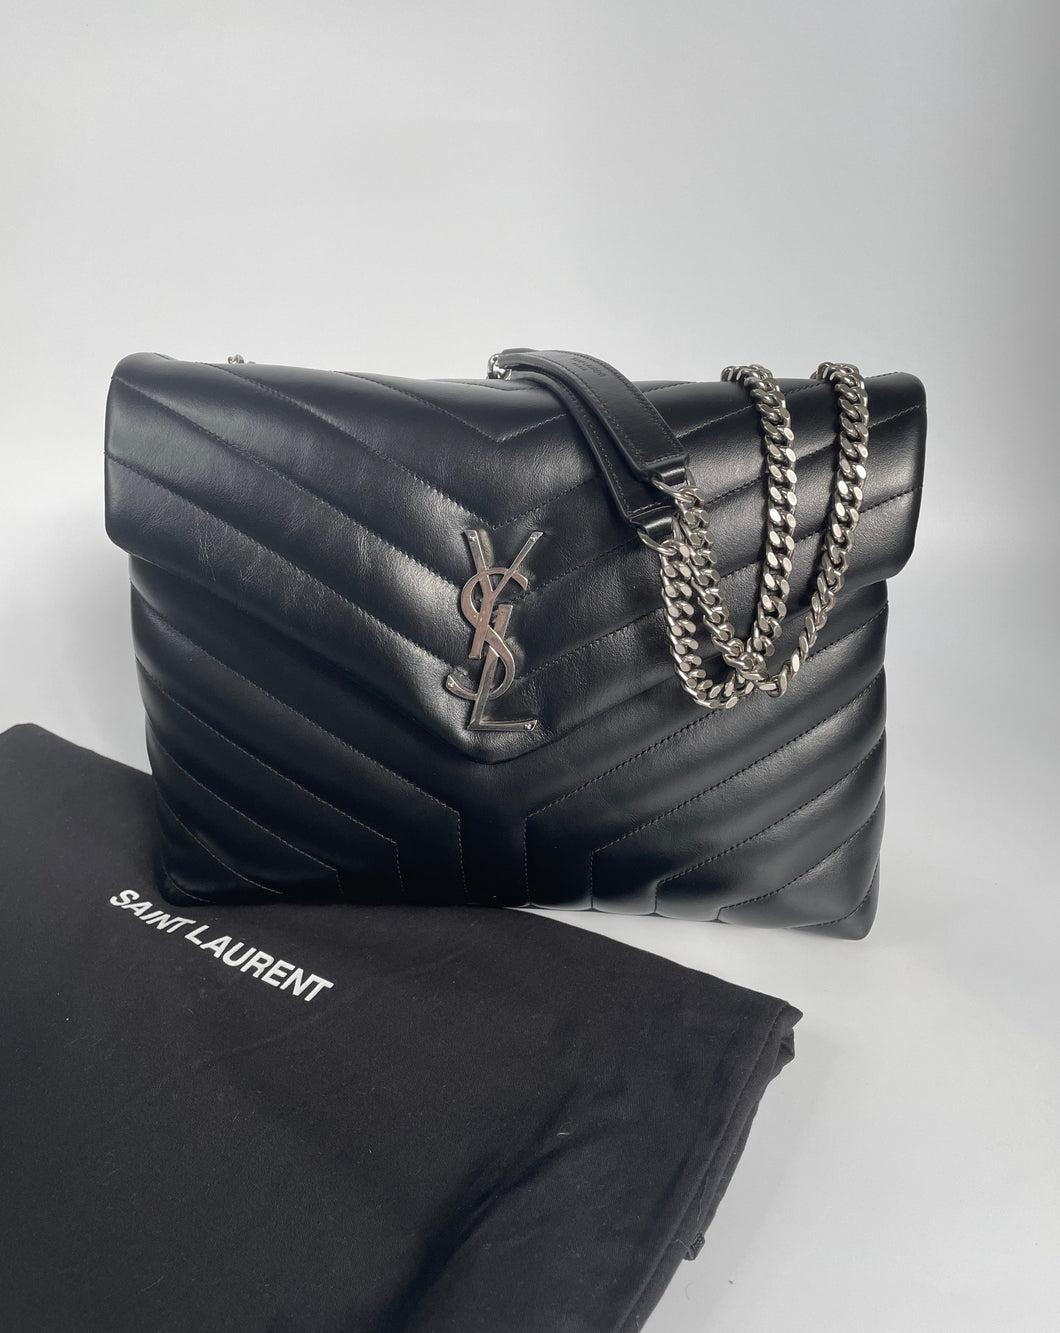 YSL Saint Laurent Small Loulou Chain Leather Shoulder Bag Black and Silver